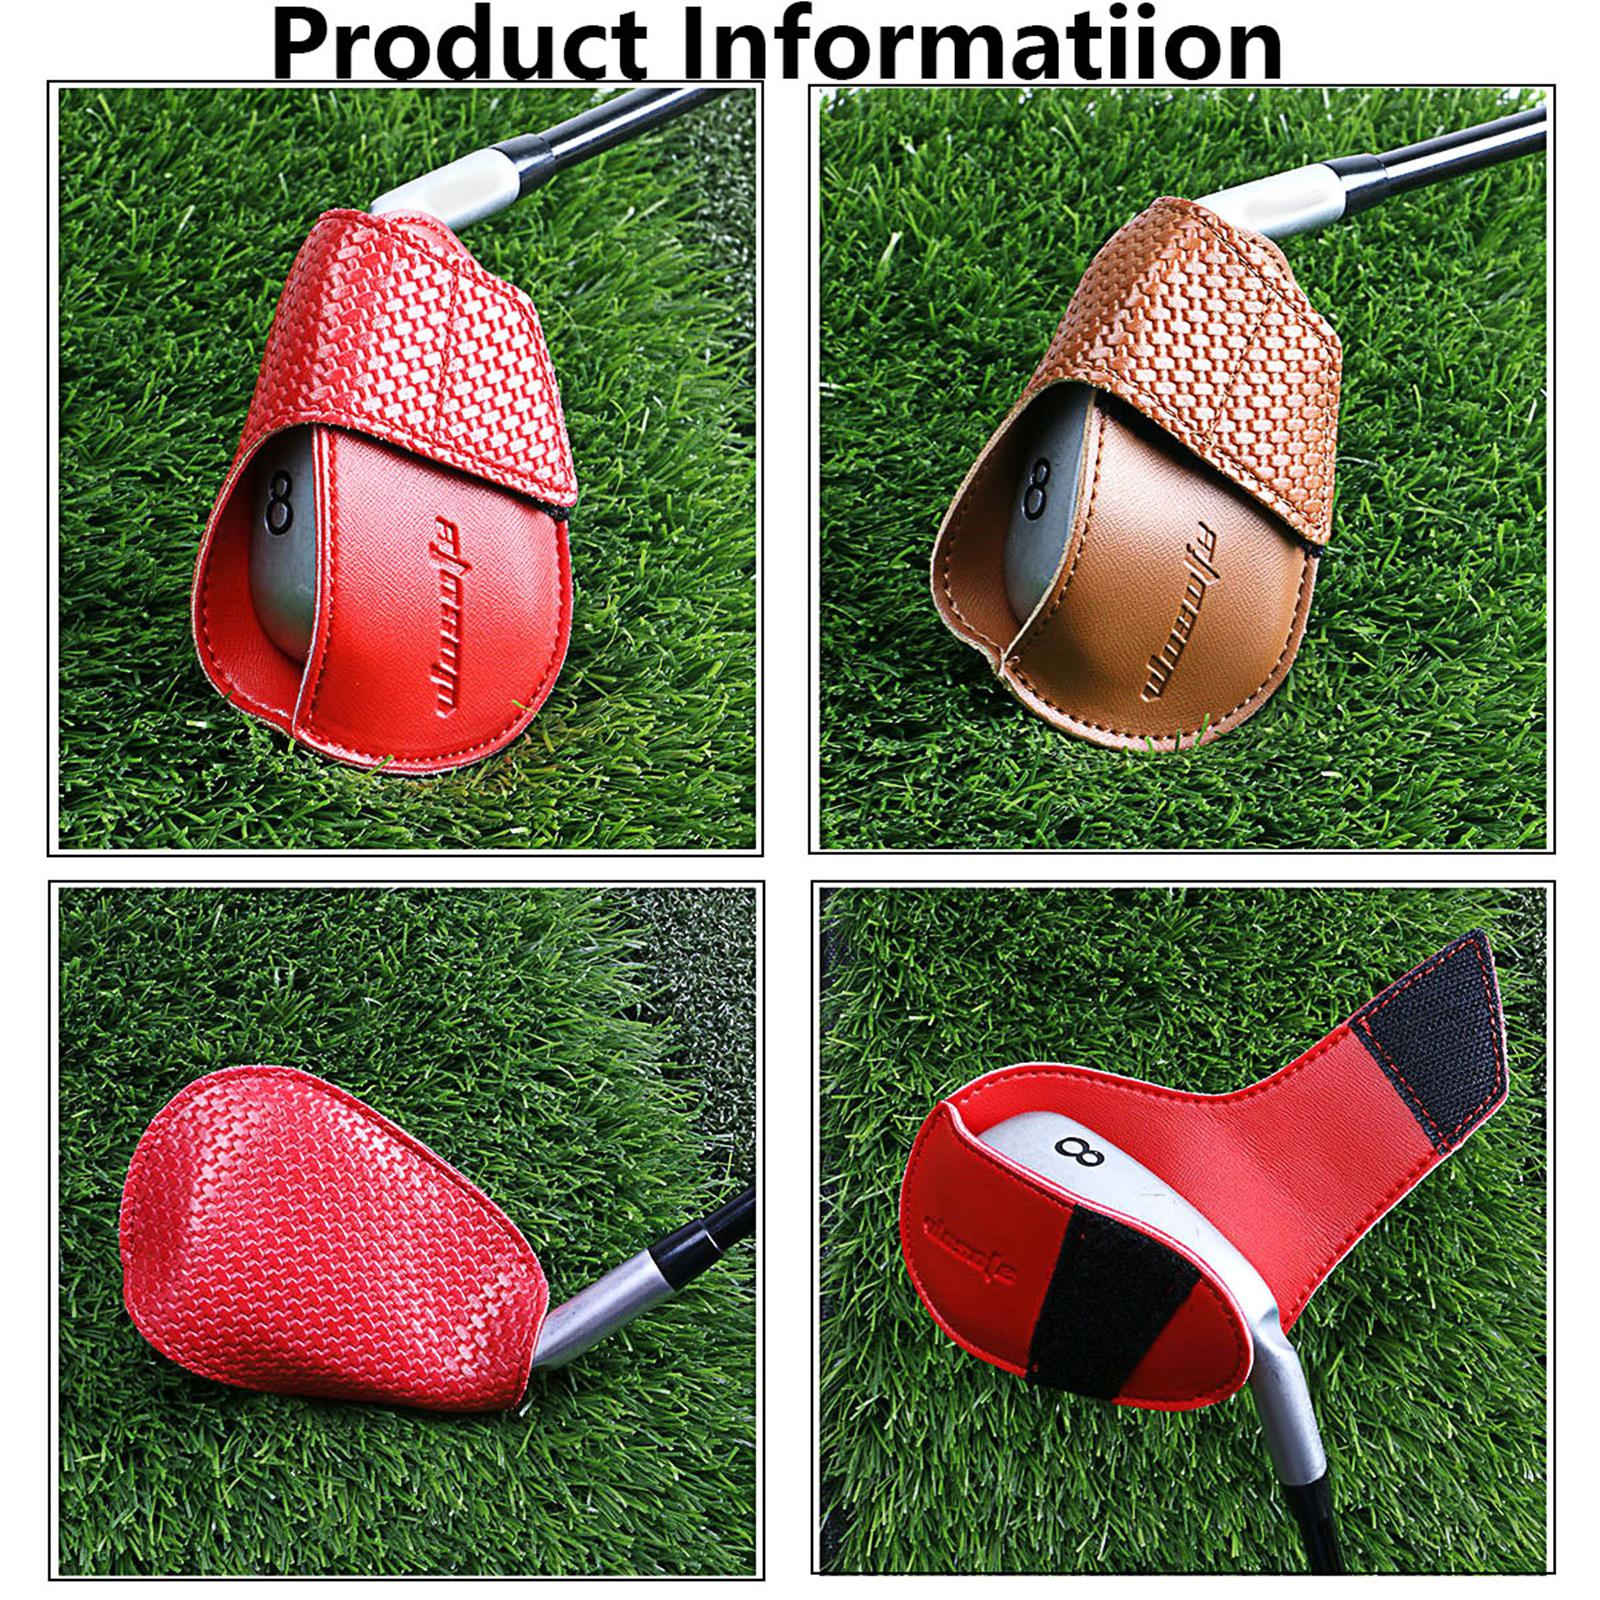 Golf Head Covers PU Portable Protector for Athlete Travel Golf Training Red Large